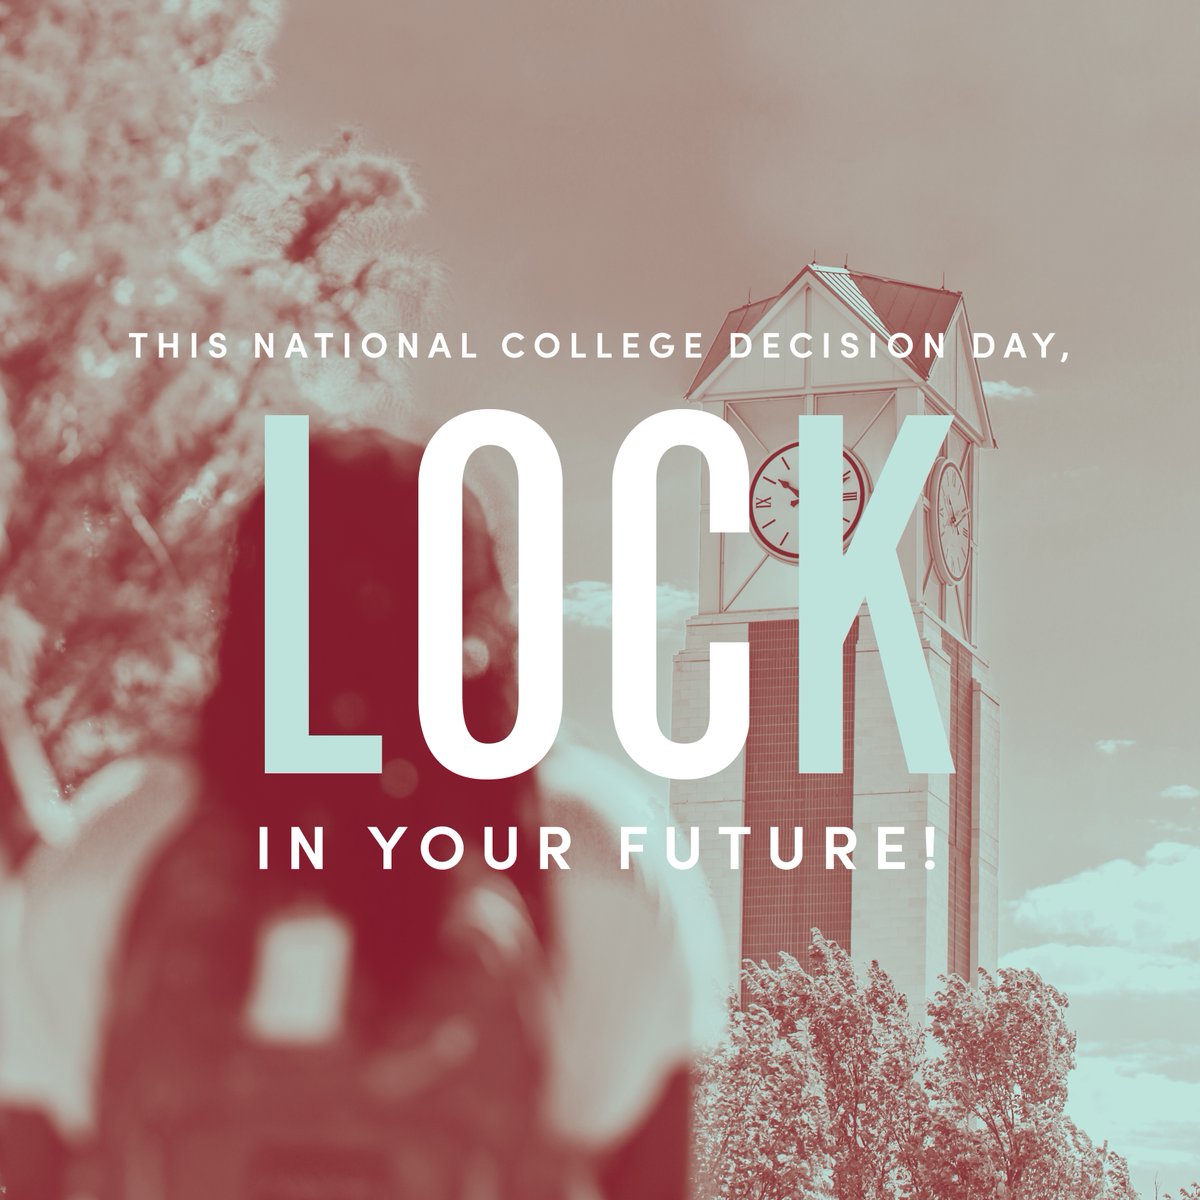 May 1 is #NationalCollegeDecisionDay! Choose OC, where faith inspires learning, dreams take flight, and your future thrives. Experience top-notch education, a supportive community, and endless possibilities. Make OC your college of choice today. #Oklahoma #Christian #FutureEagle